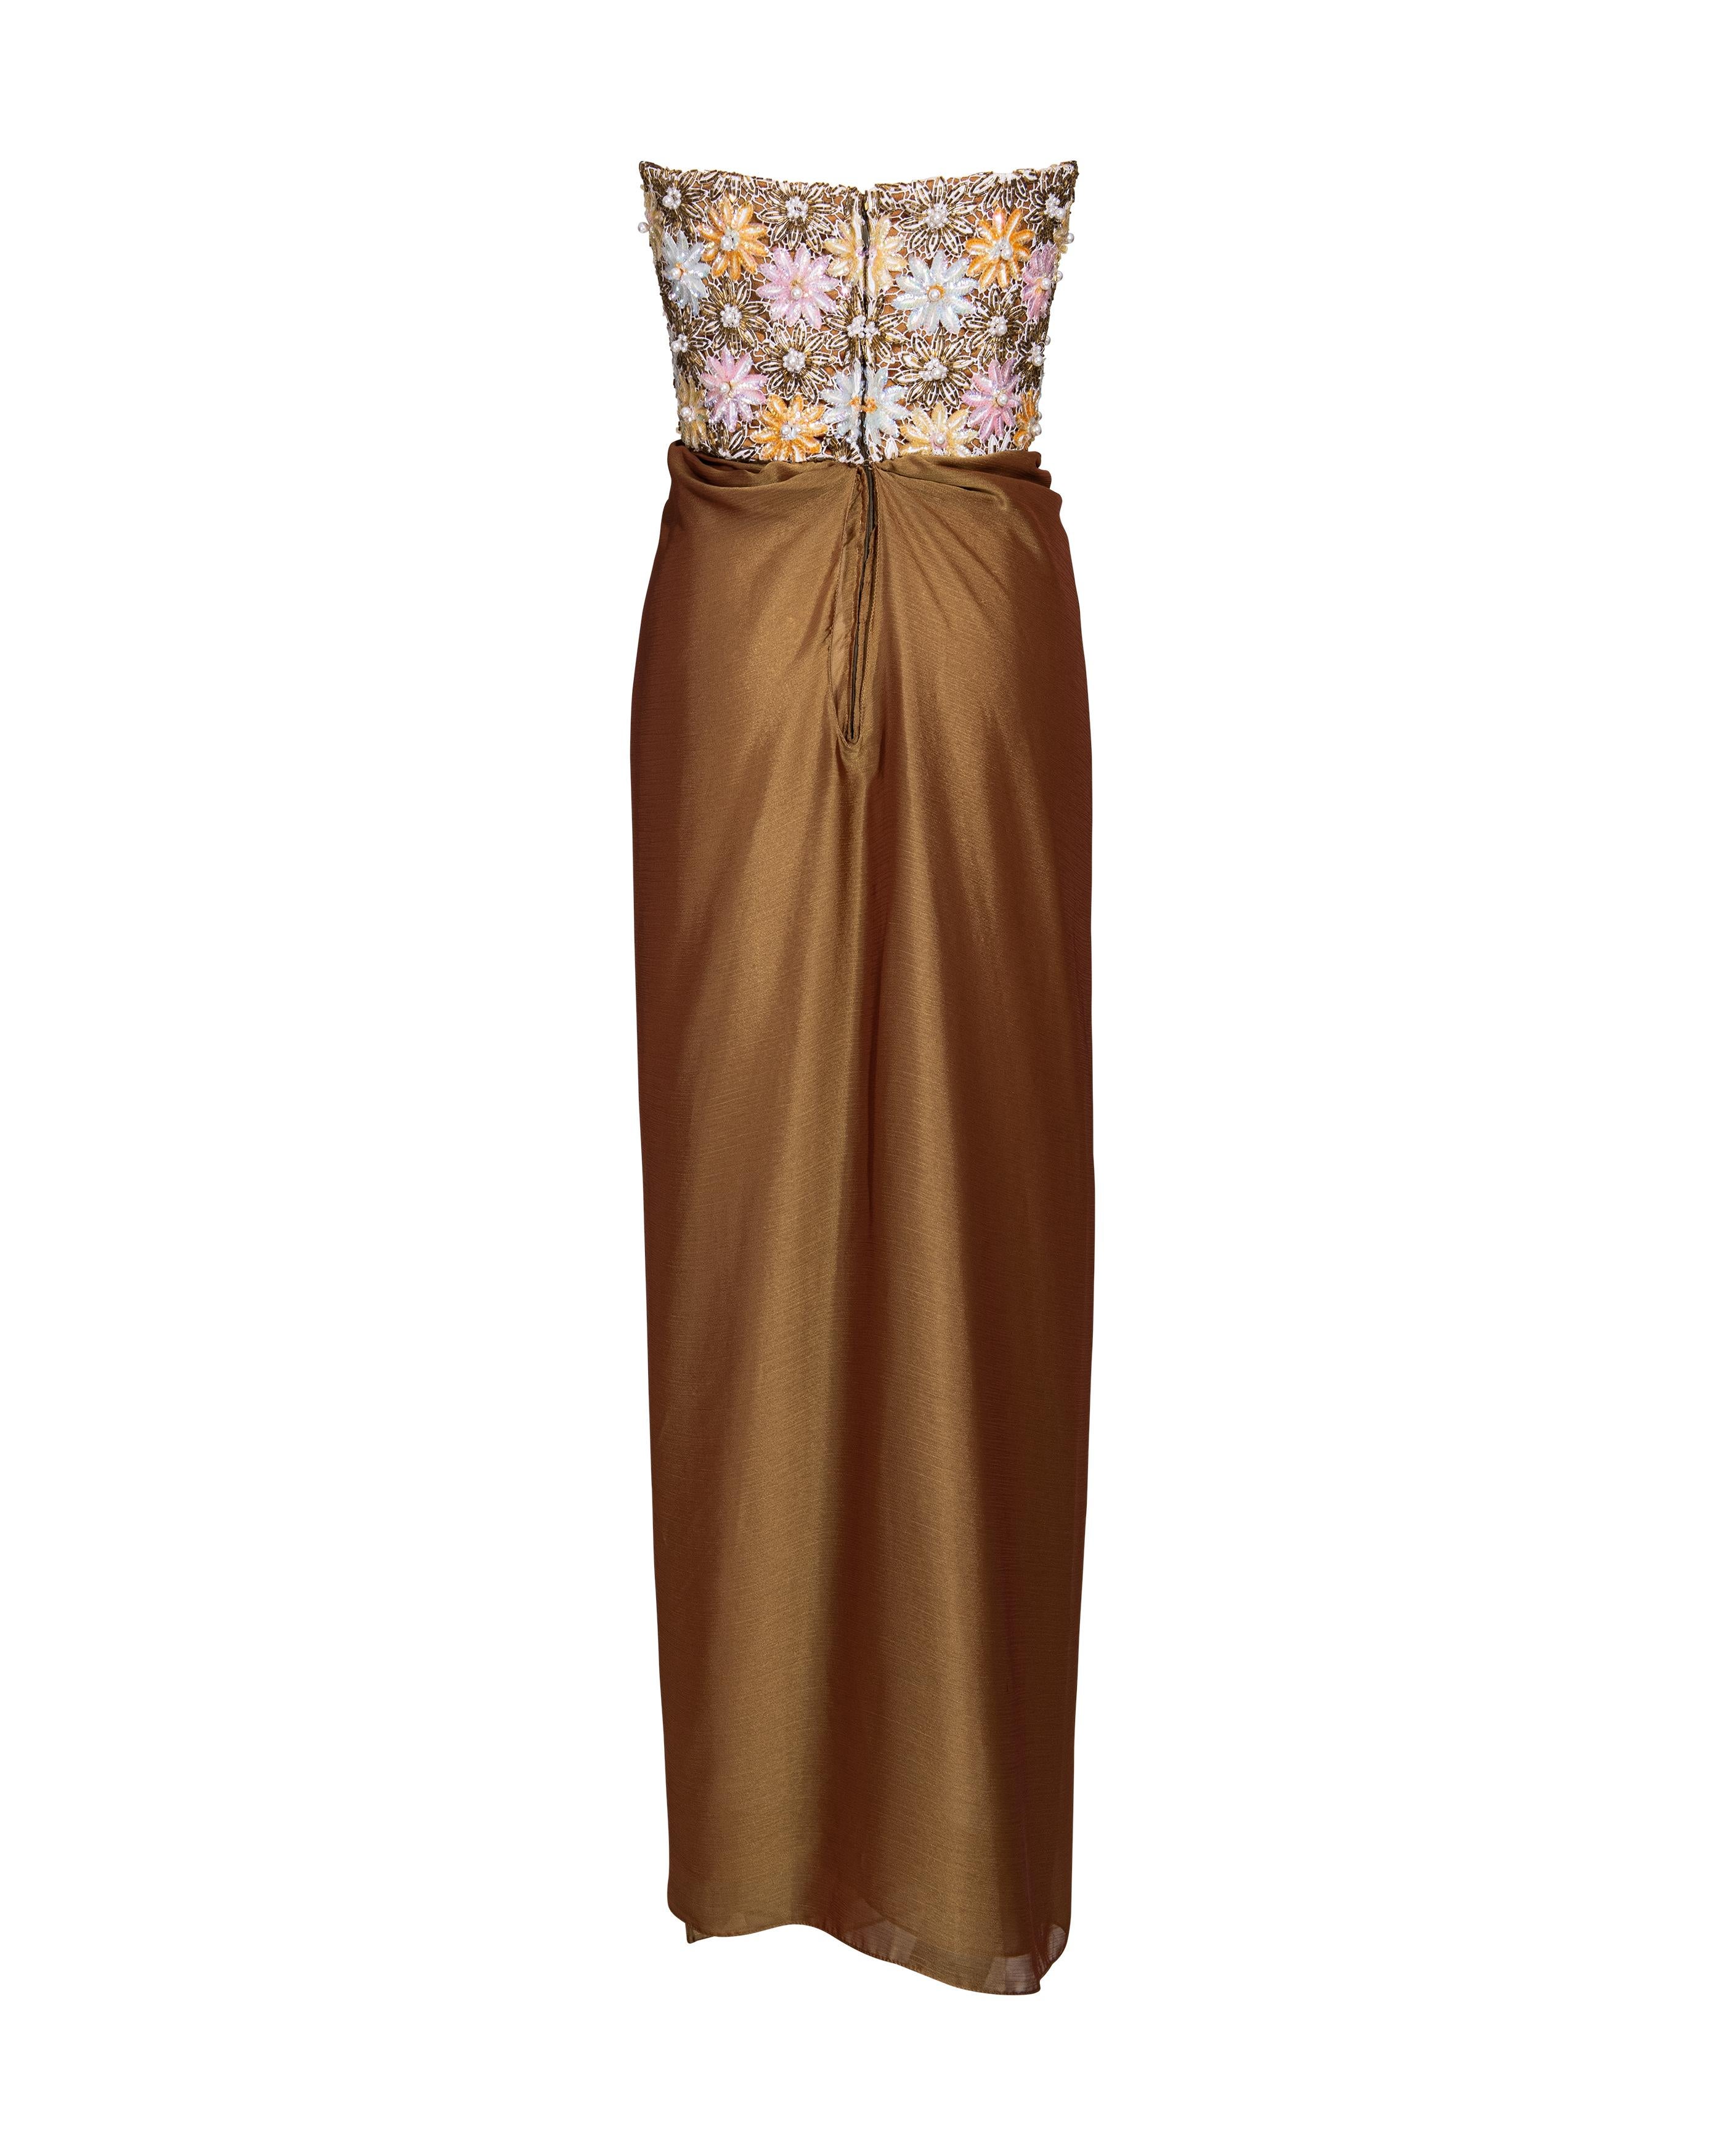 c. 1991 Nina Ricci Embellished Copper Strapless Gown with Stole For Sale 3